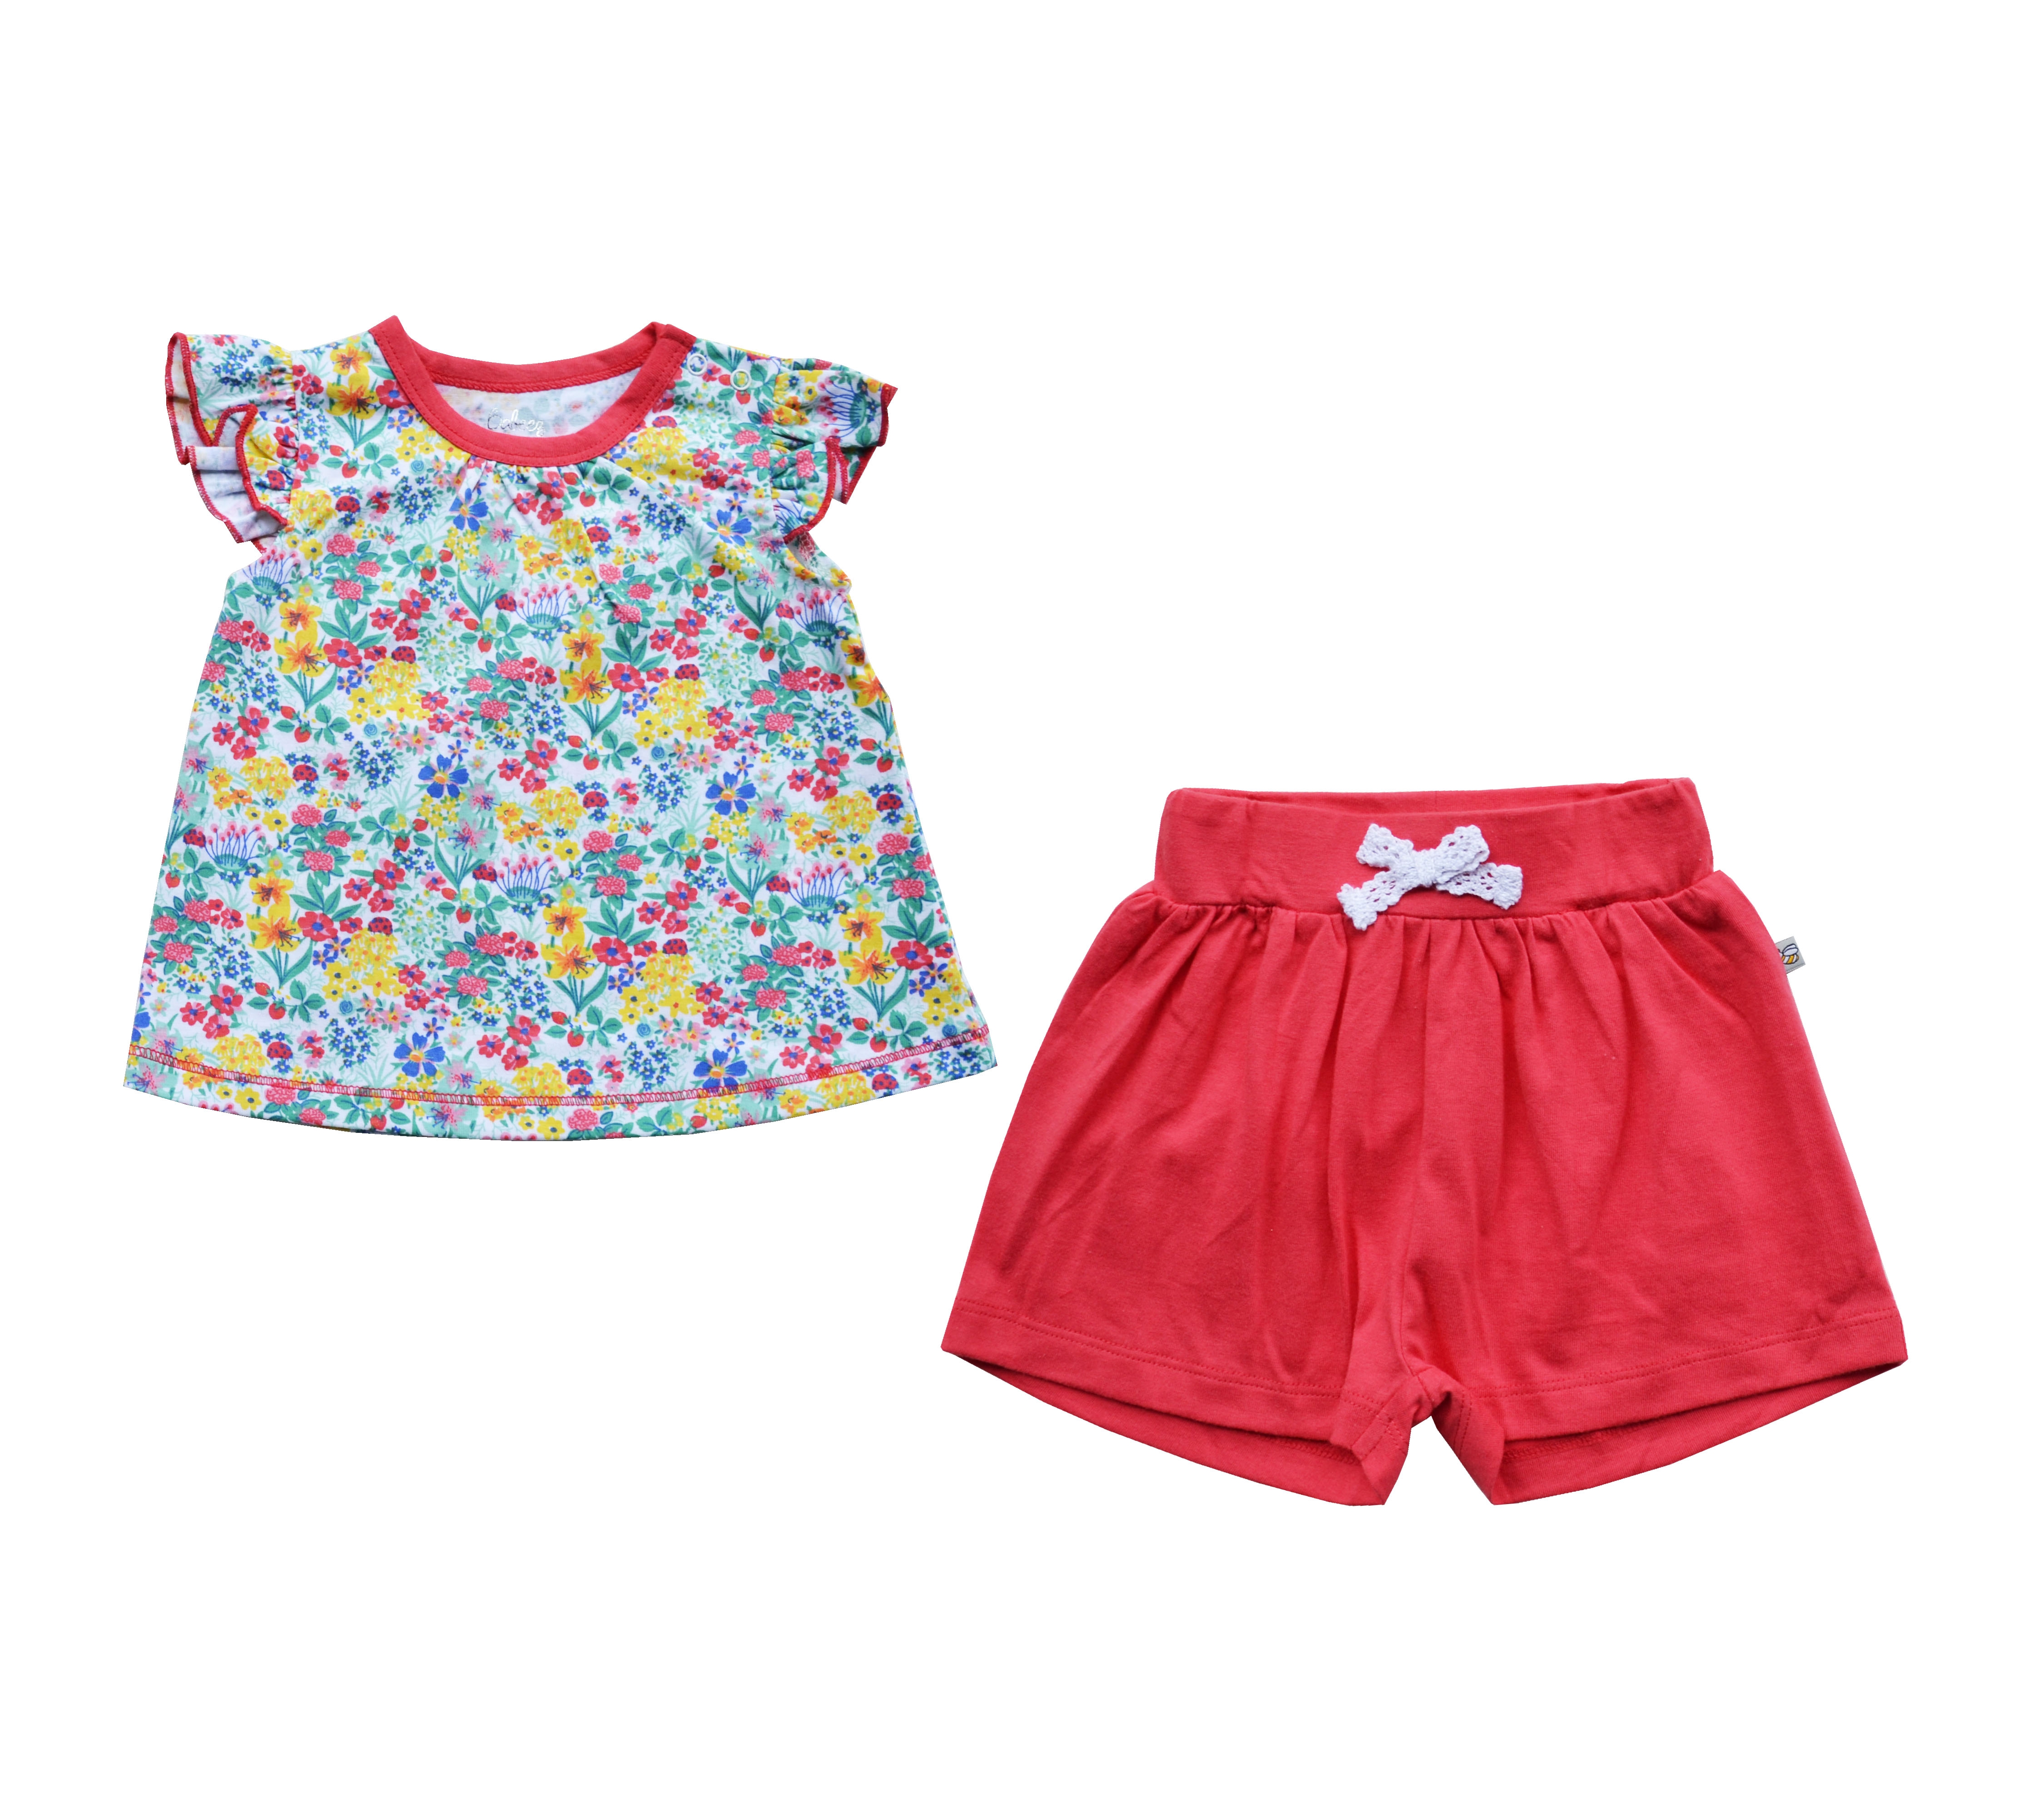 Allover Multicolored Flower Top + Red Shorty Set (100% Cotton Single Jersey)